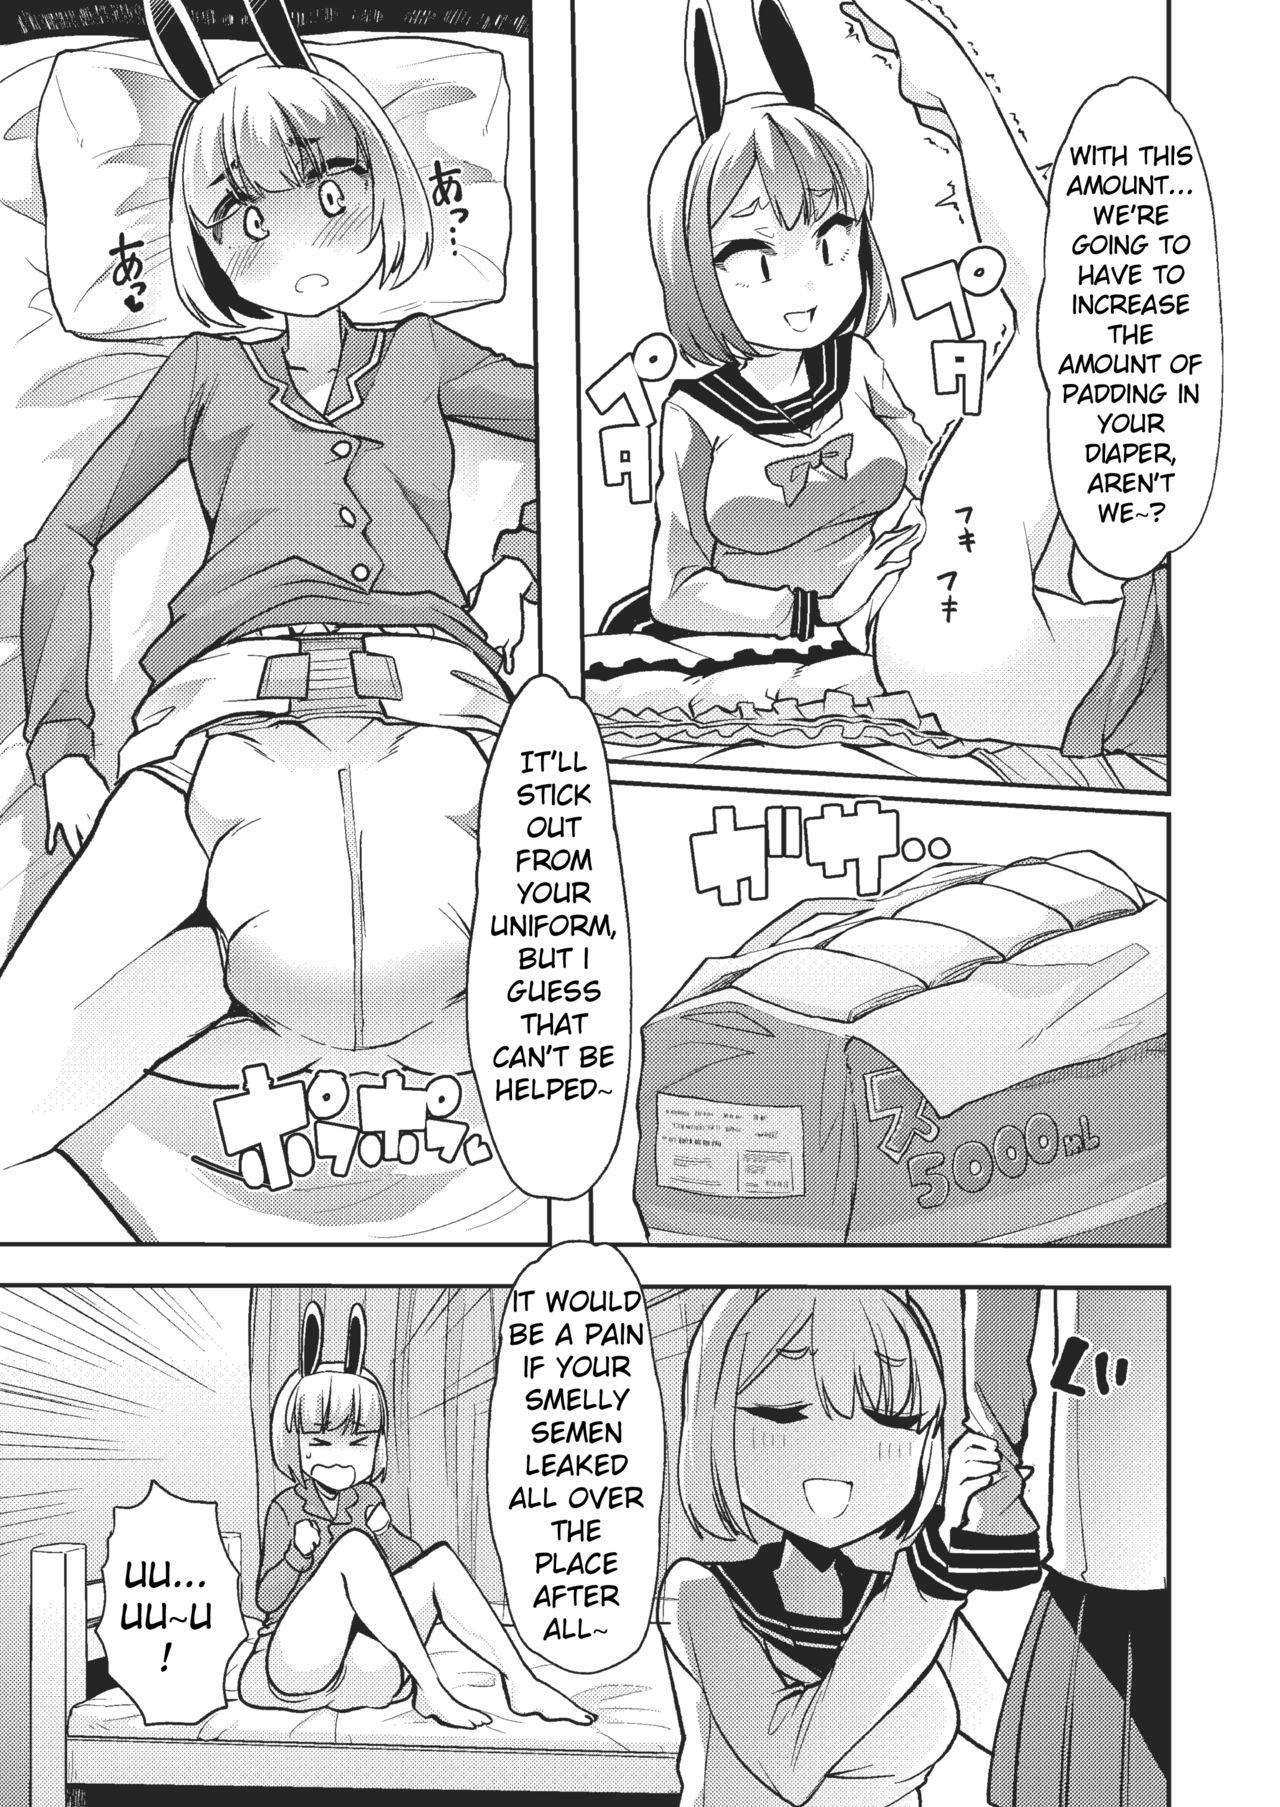 Perverted [Team Harenchi (Goya)] Shasei-byou Onii-chan [English] [Digital] - Original Pussy To Mouth - Page 5